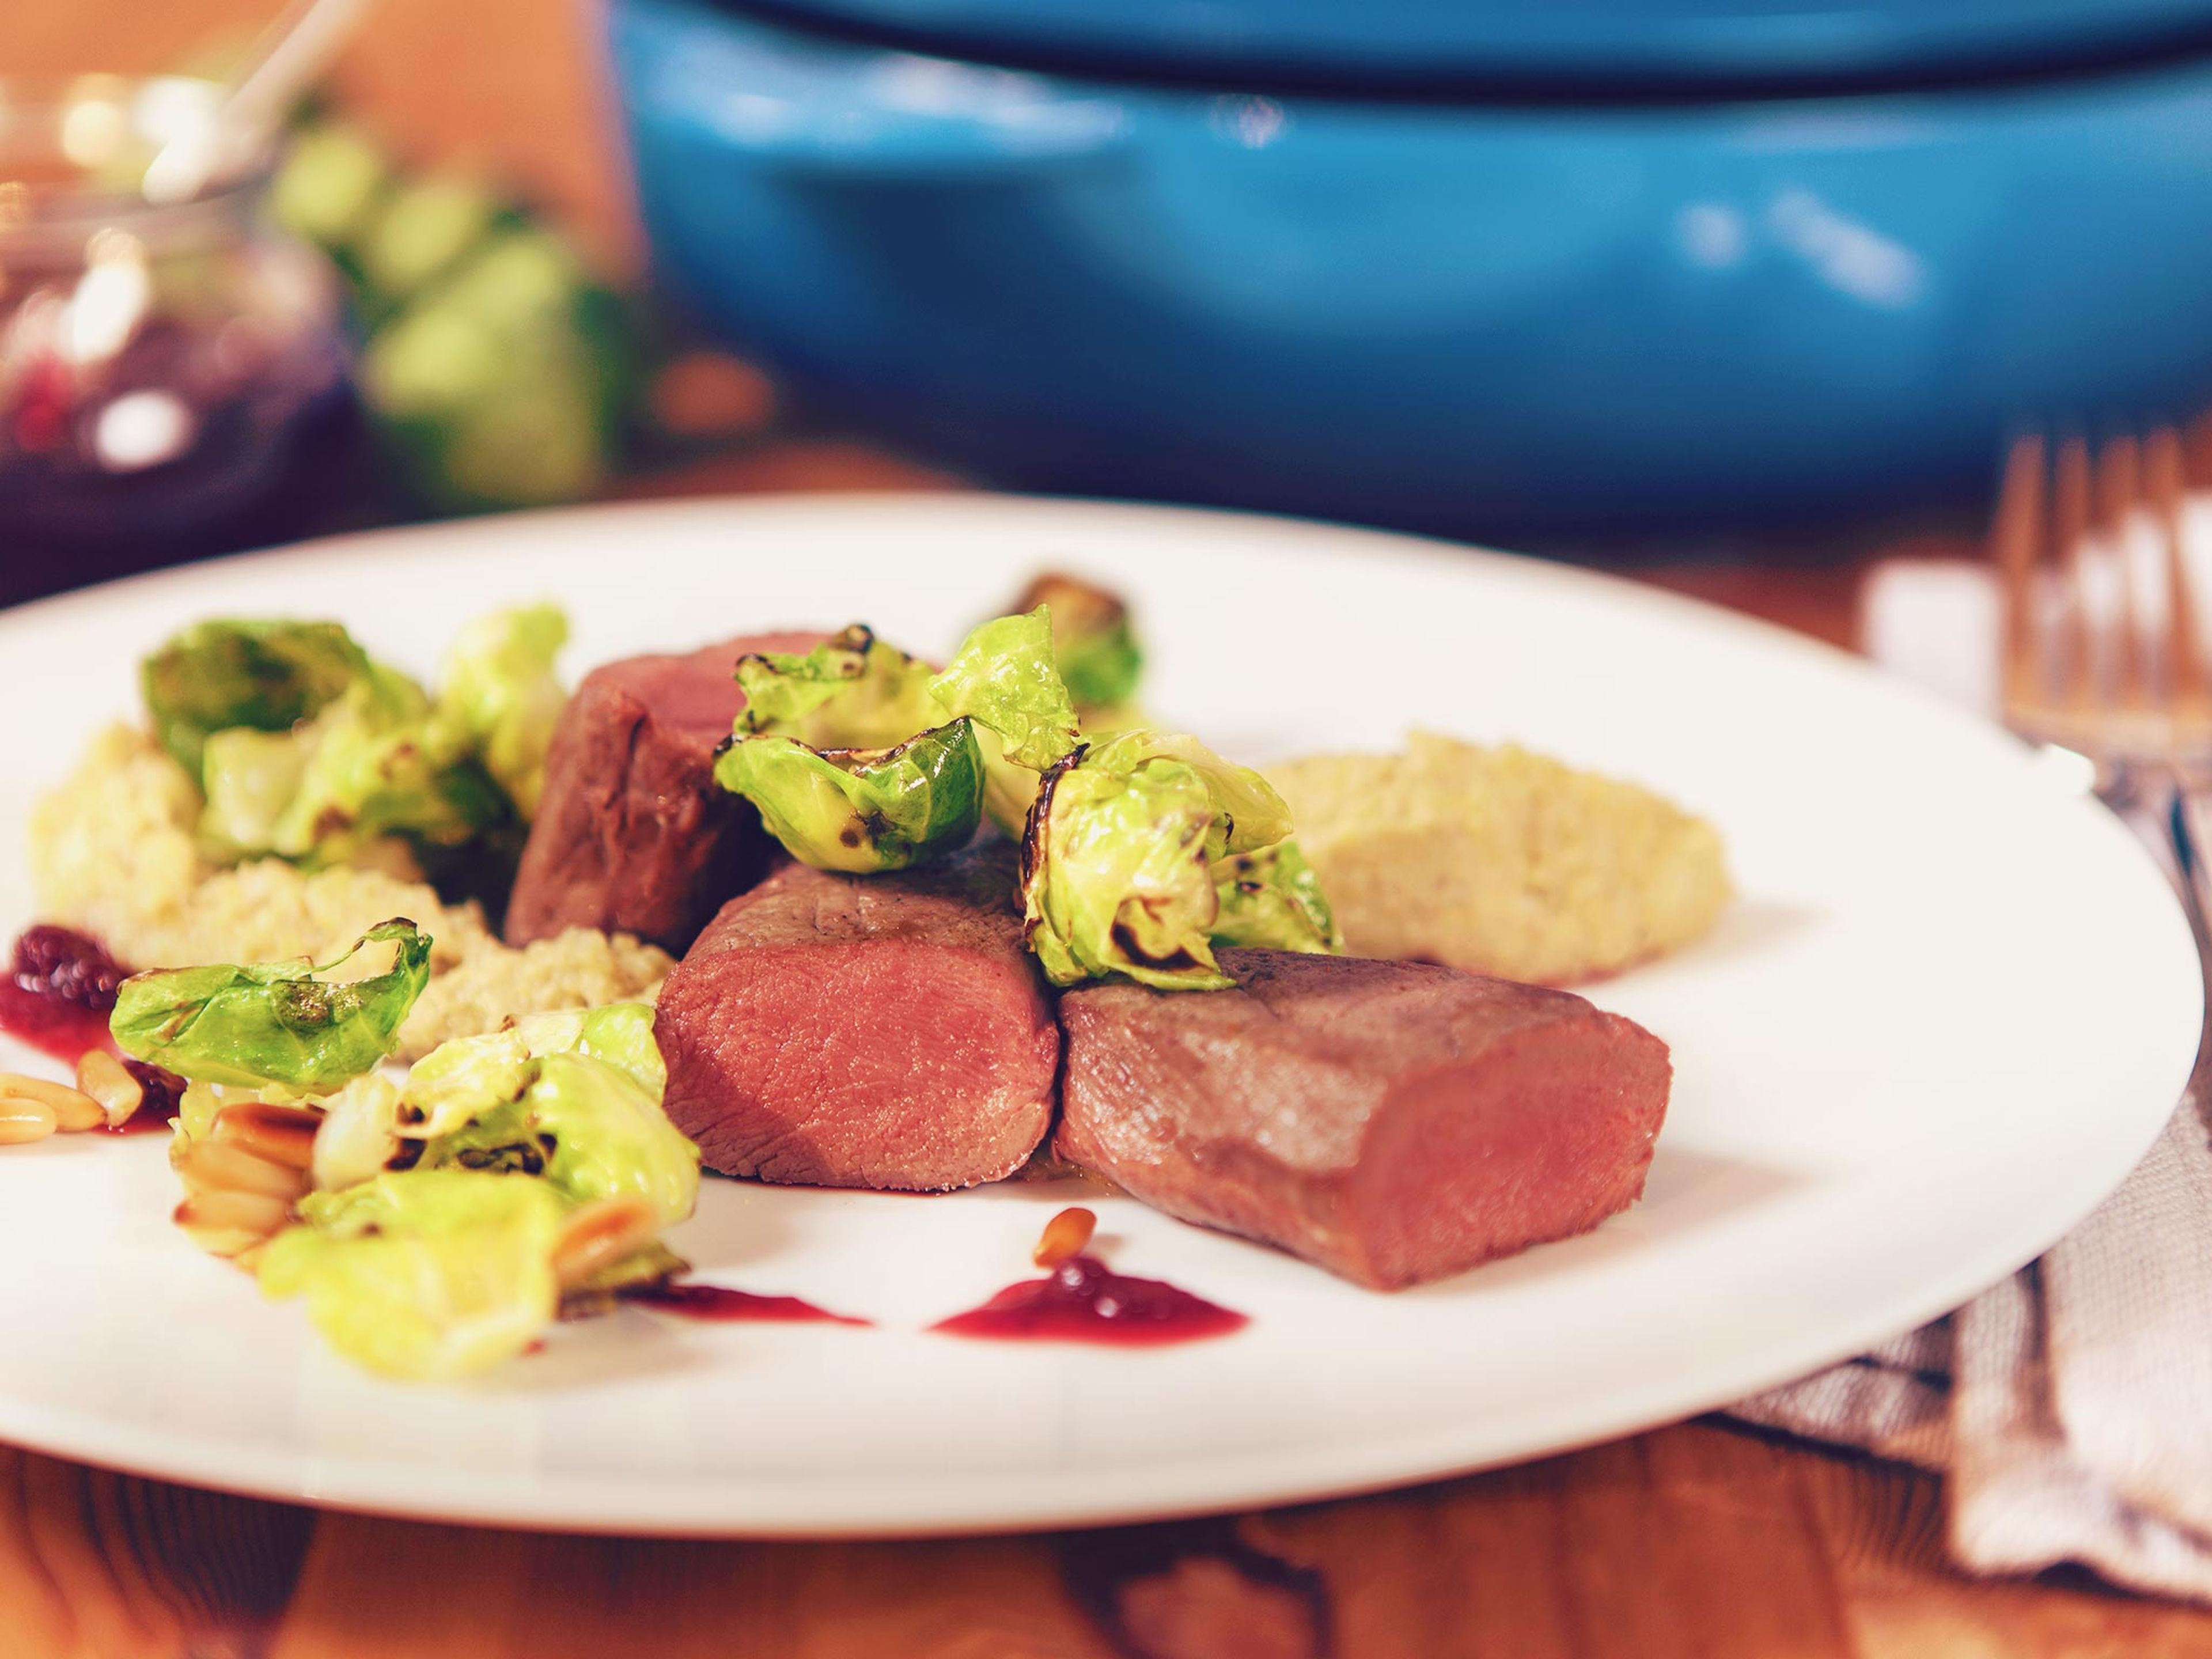 Saddle of venison with Brussels sprouts